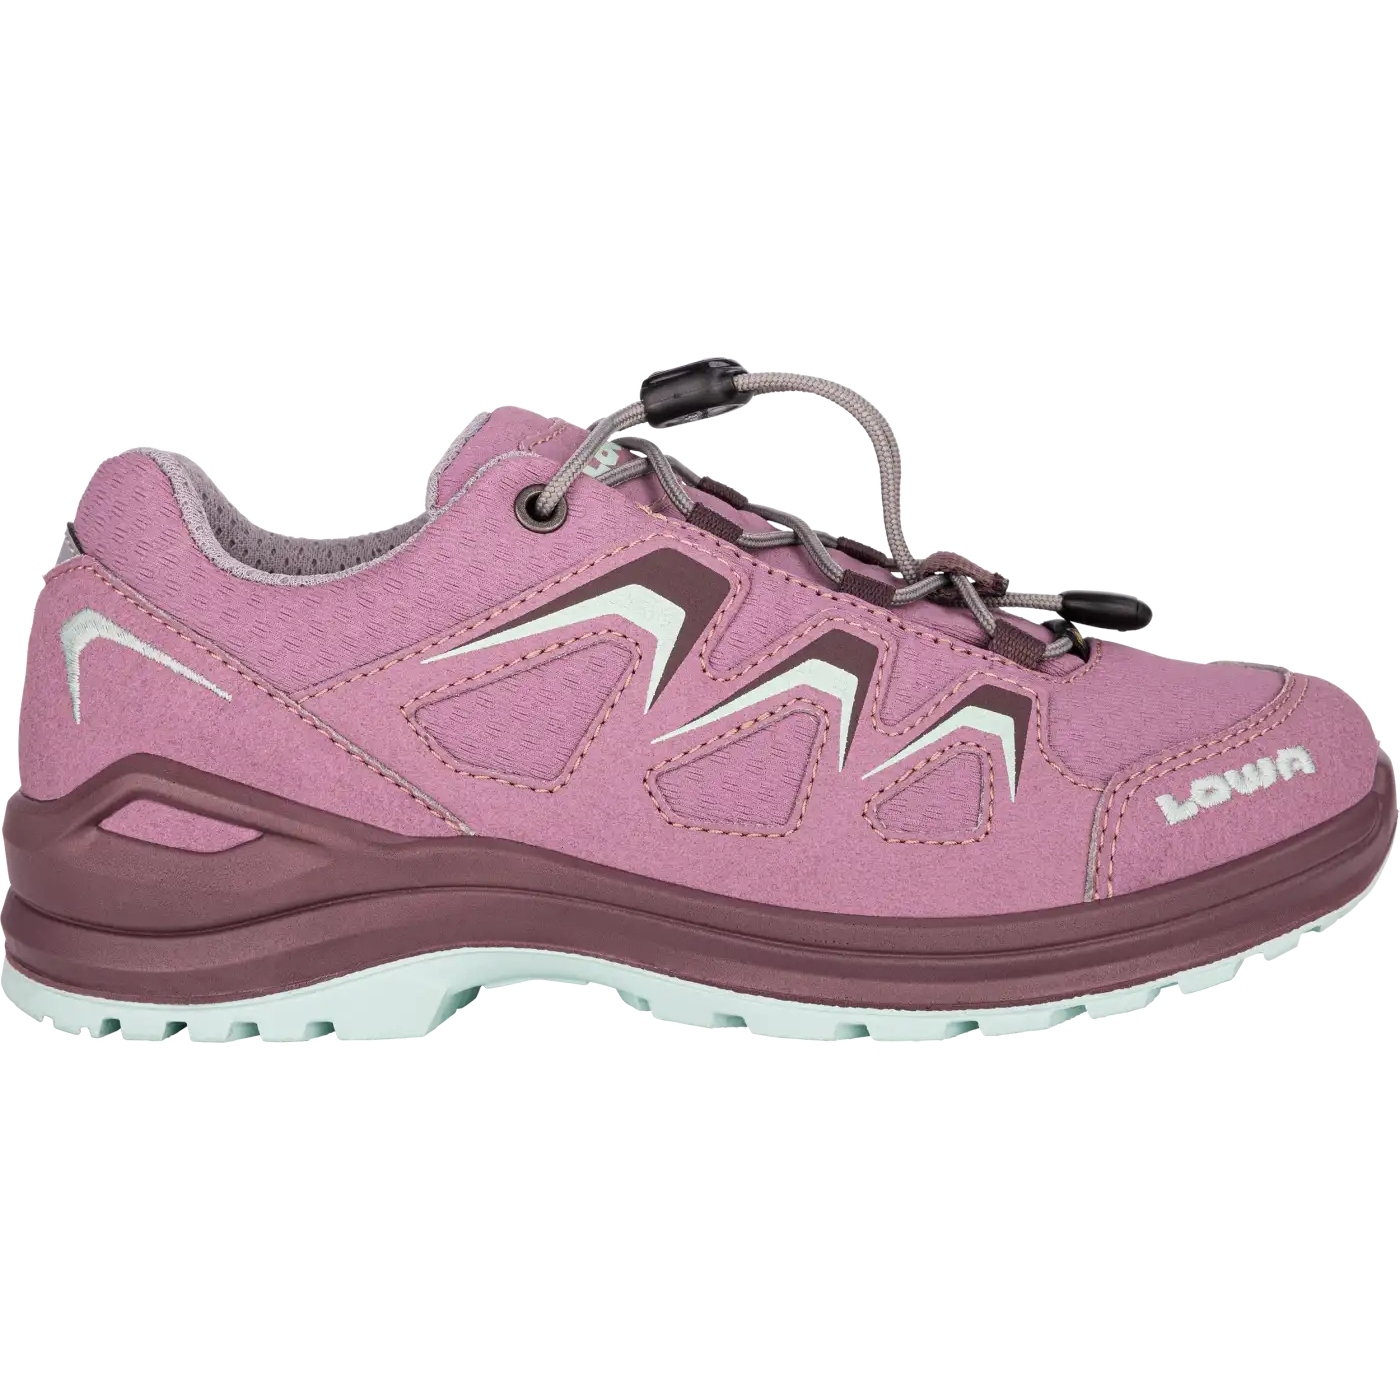 Picture of LOWA Innox Evo GTX Lo Junior Kids Shoes - orchid/jade (Size 36-38)